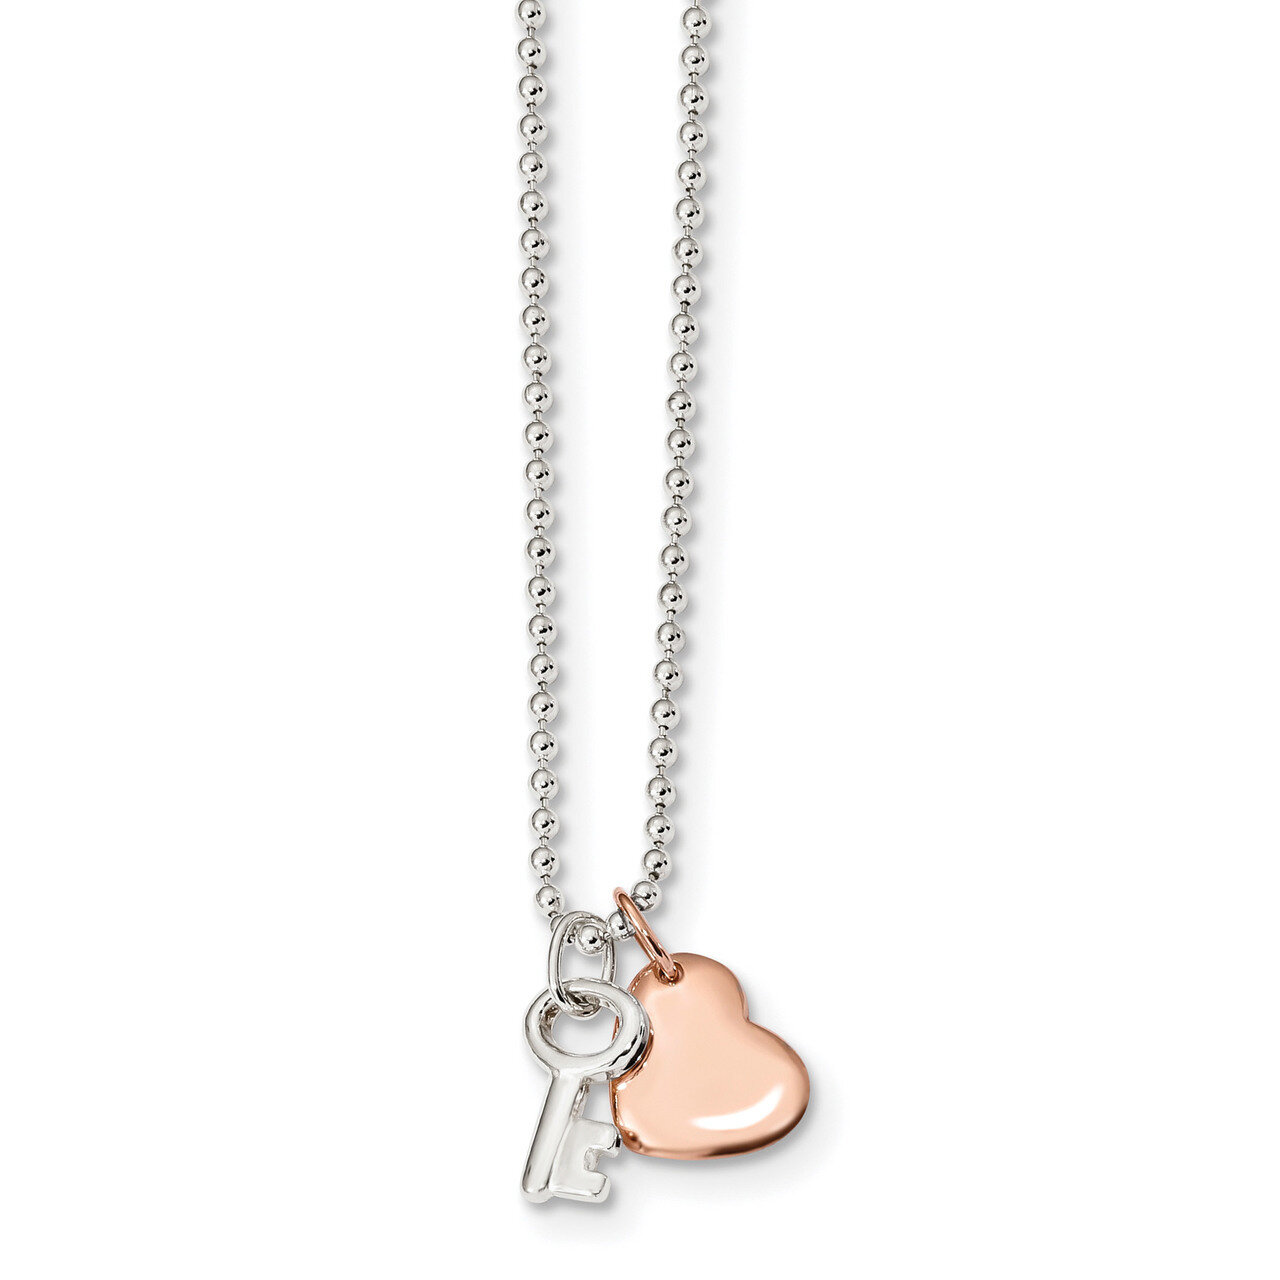 Rose-tone Heart with Key 1 Necklace 19 Inch Sterling Silver QG4351-19